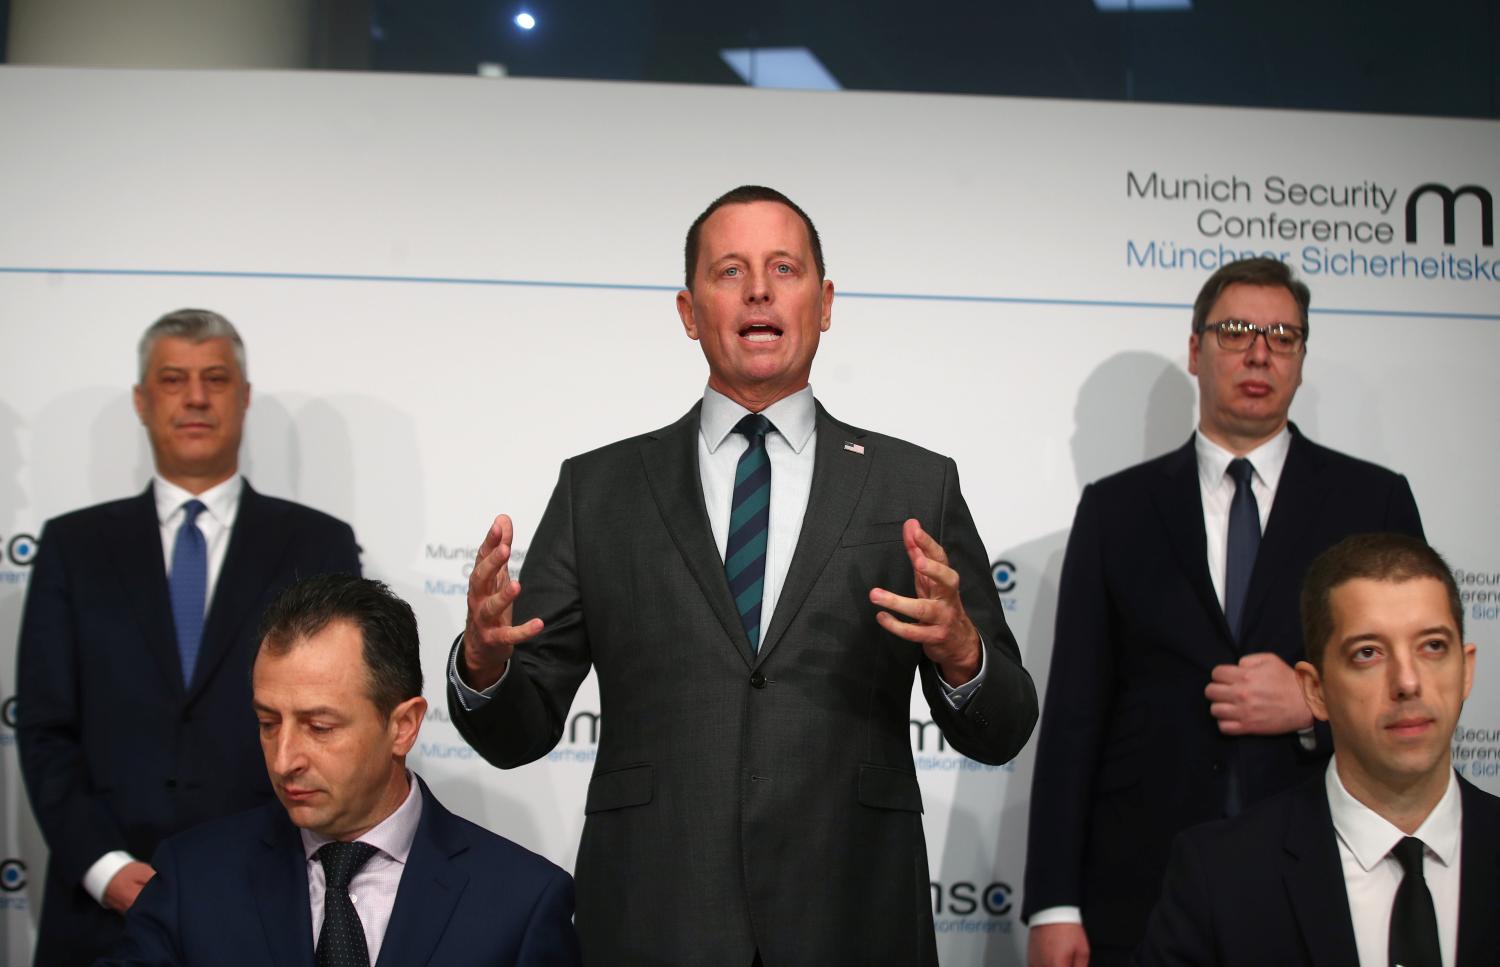 U.S. ambassador to Germany Richard Grenell, Kosovo's President Hashim Thaci and Serbia's President Aleksandar Vucic attend the Munich Security Conference in Munich, Germany, February 14, 2020. REUTERS/Michael Dalder